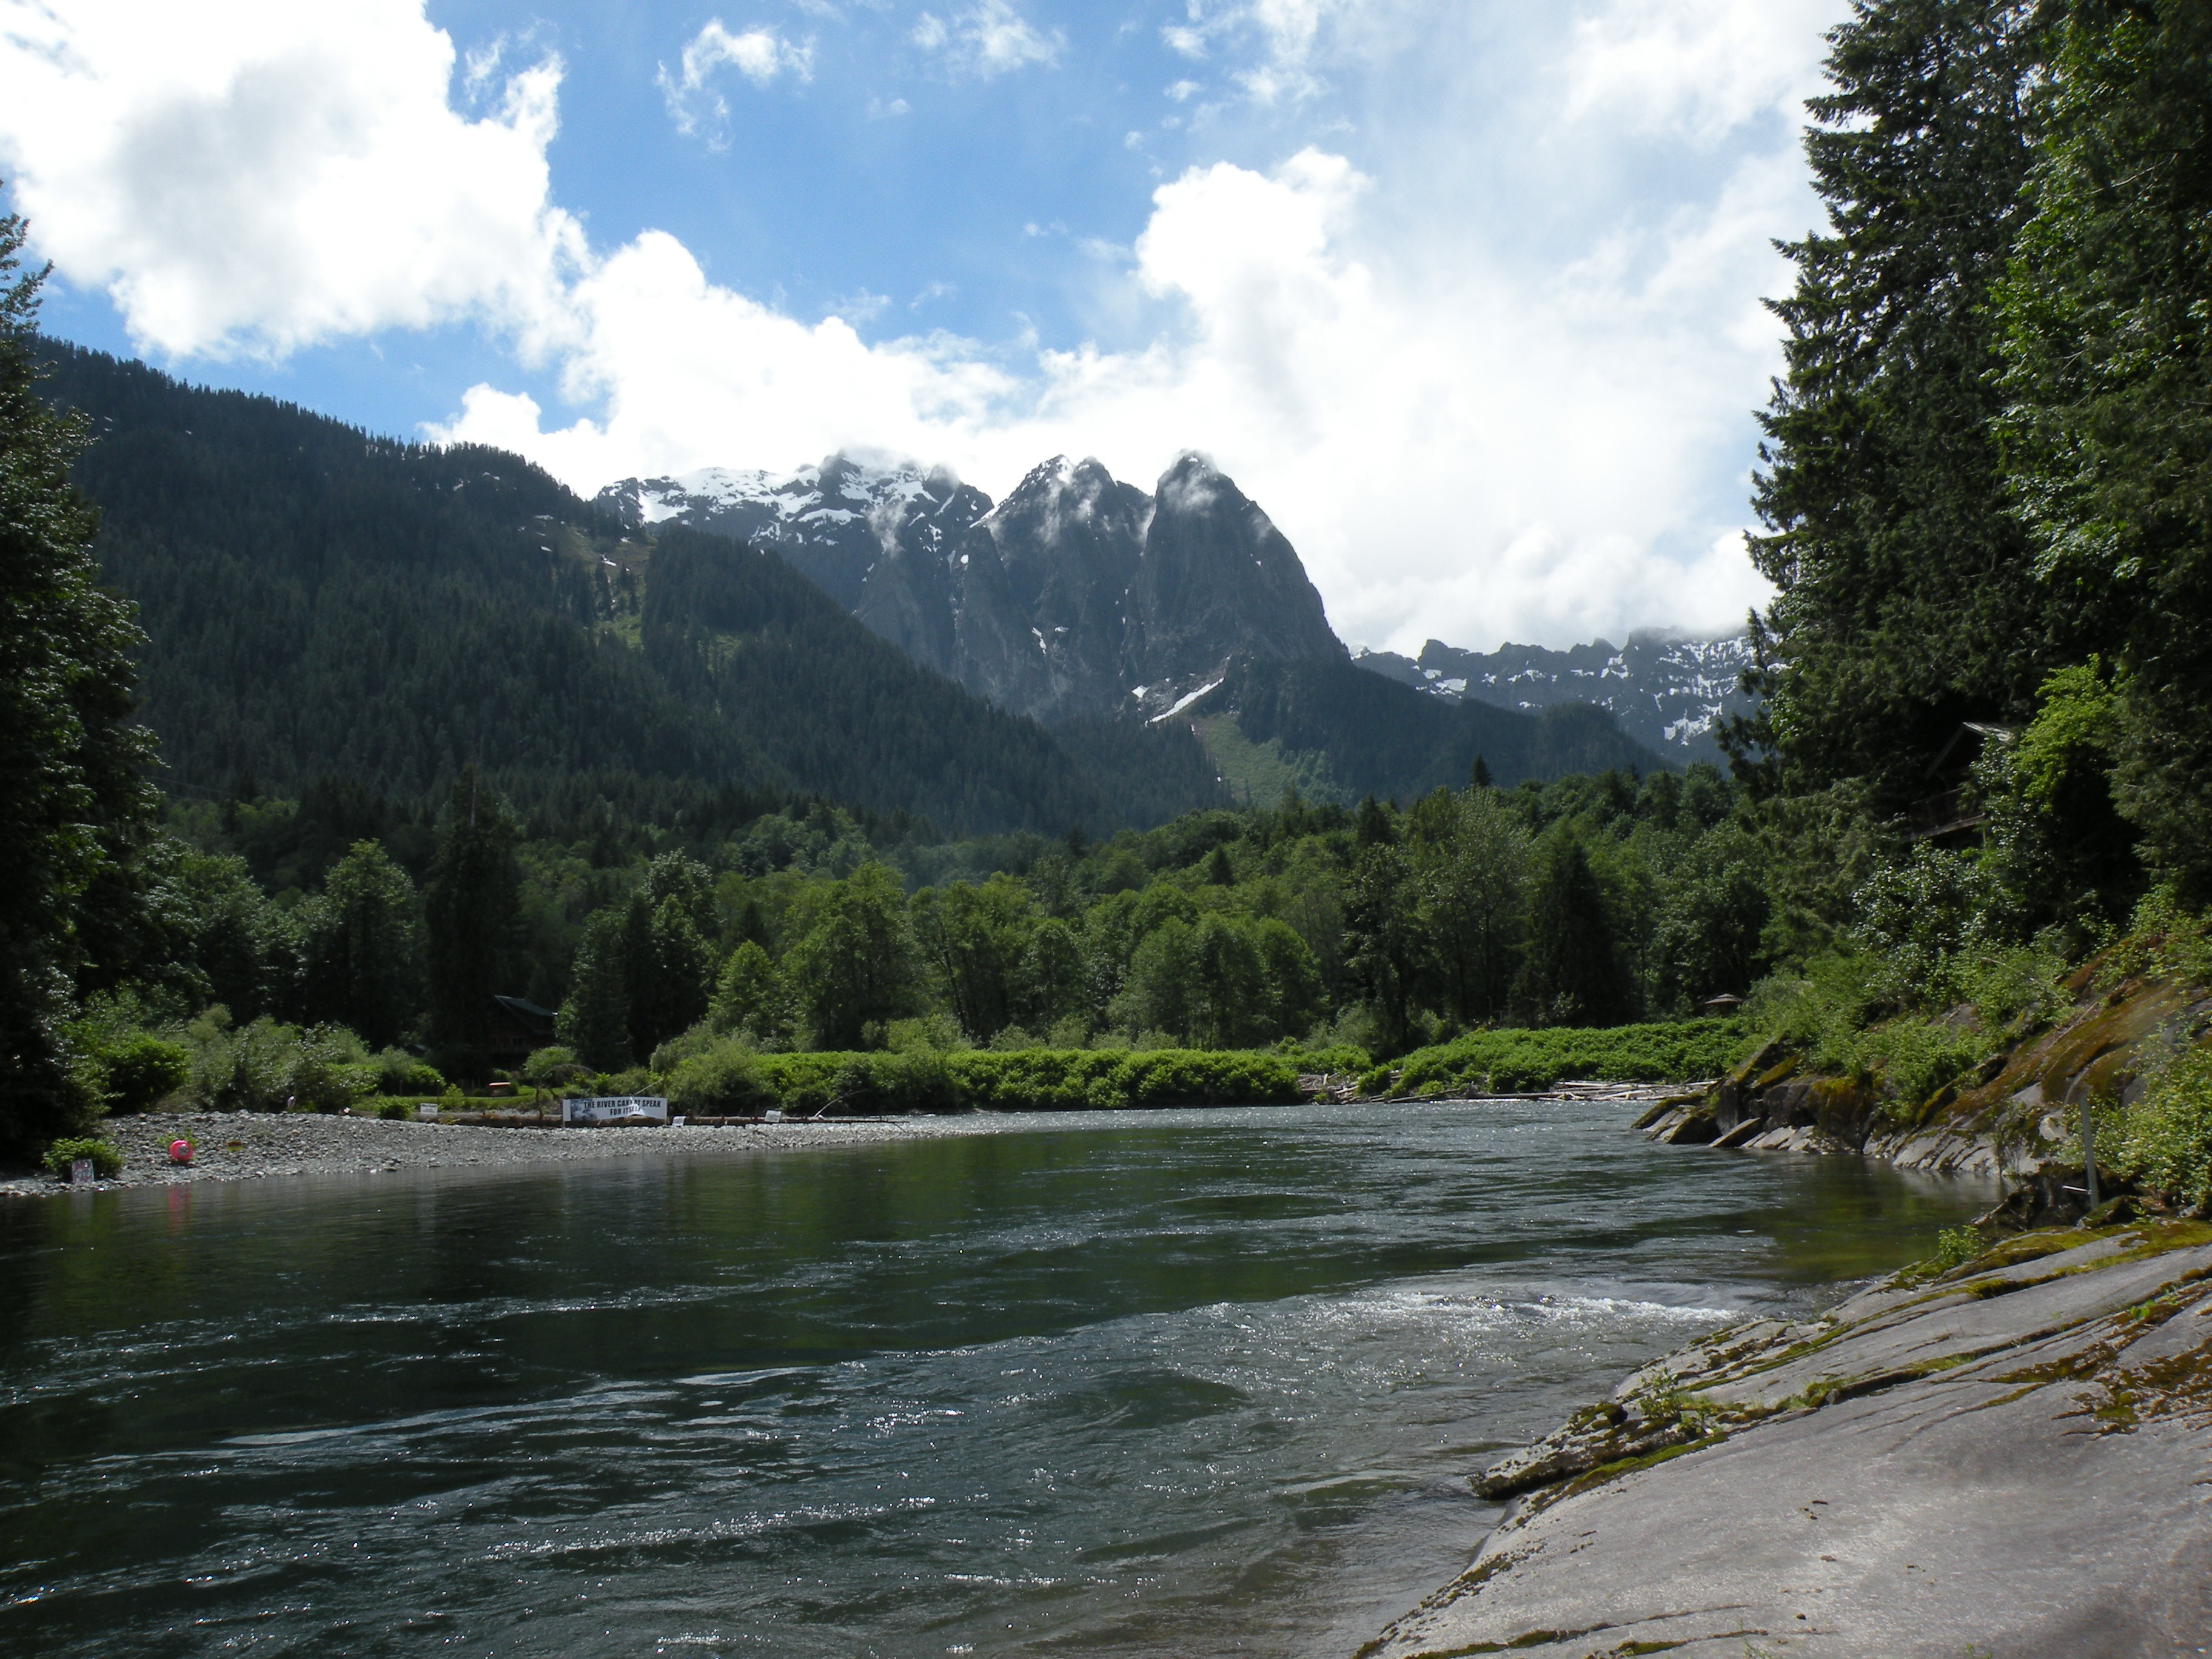 Snohomish County PUD wants to install a small, inflatable dam at this bend on the south fork of the Skykomish River.Bellamy Pailthorp / KPLU News